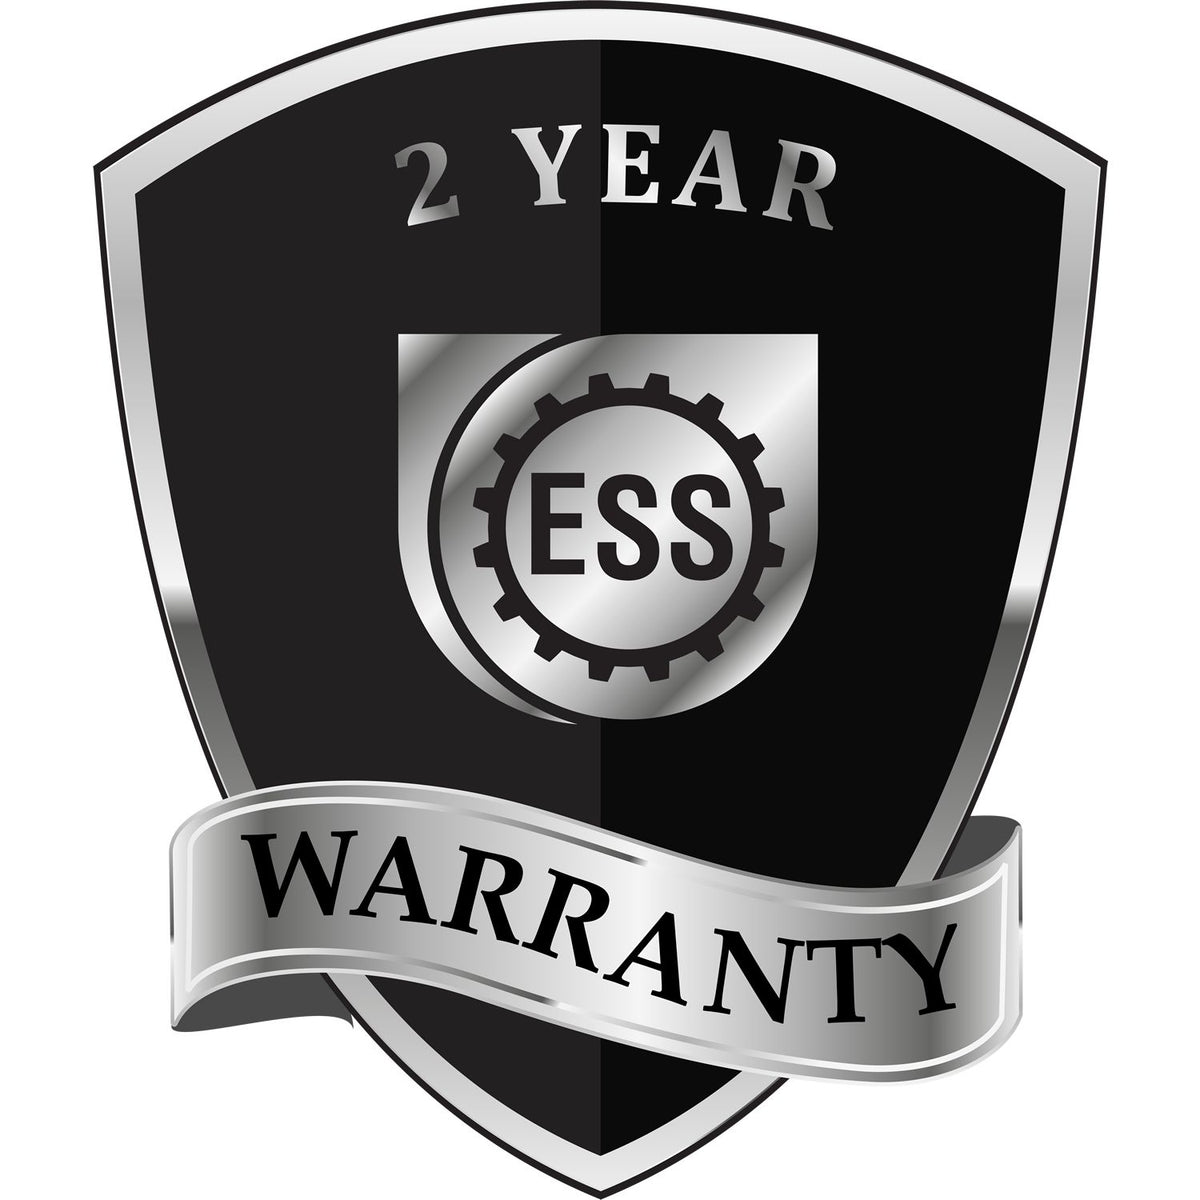 A badge or emblem showing a warranty icon for the Extended Long Reach North Dakota Architect Seal Embosser